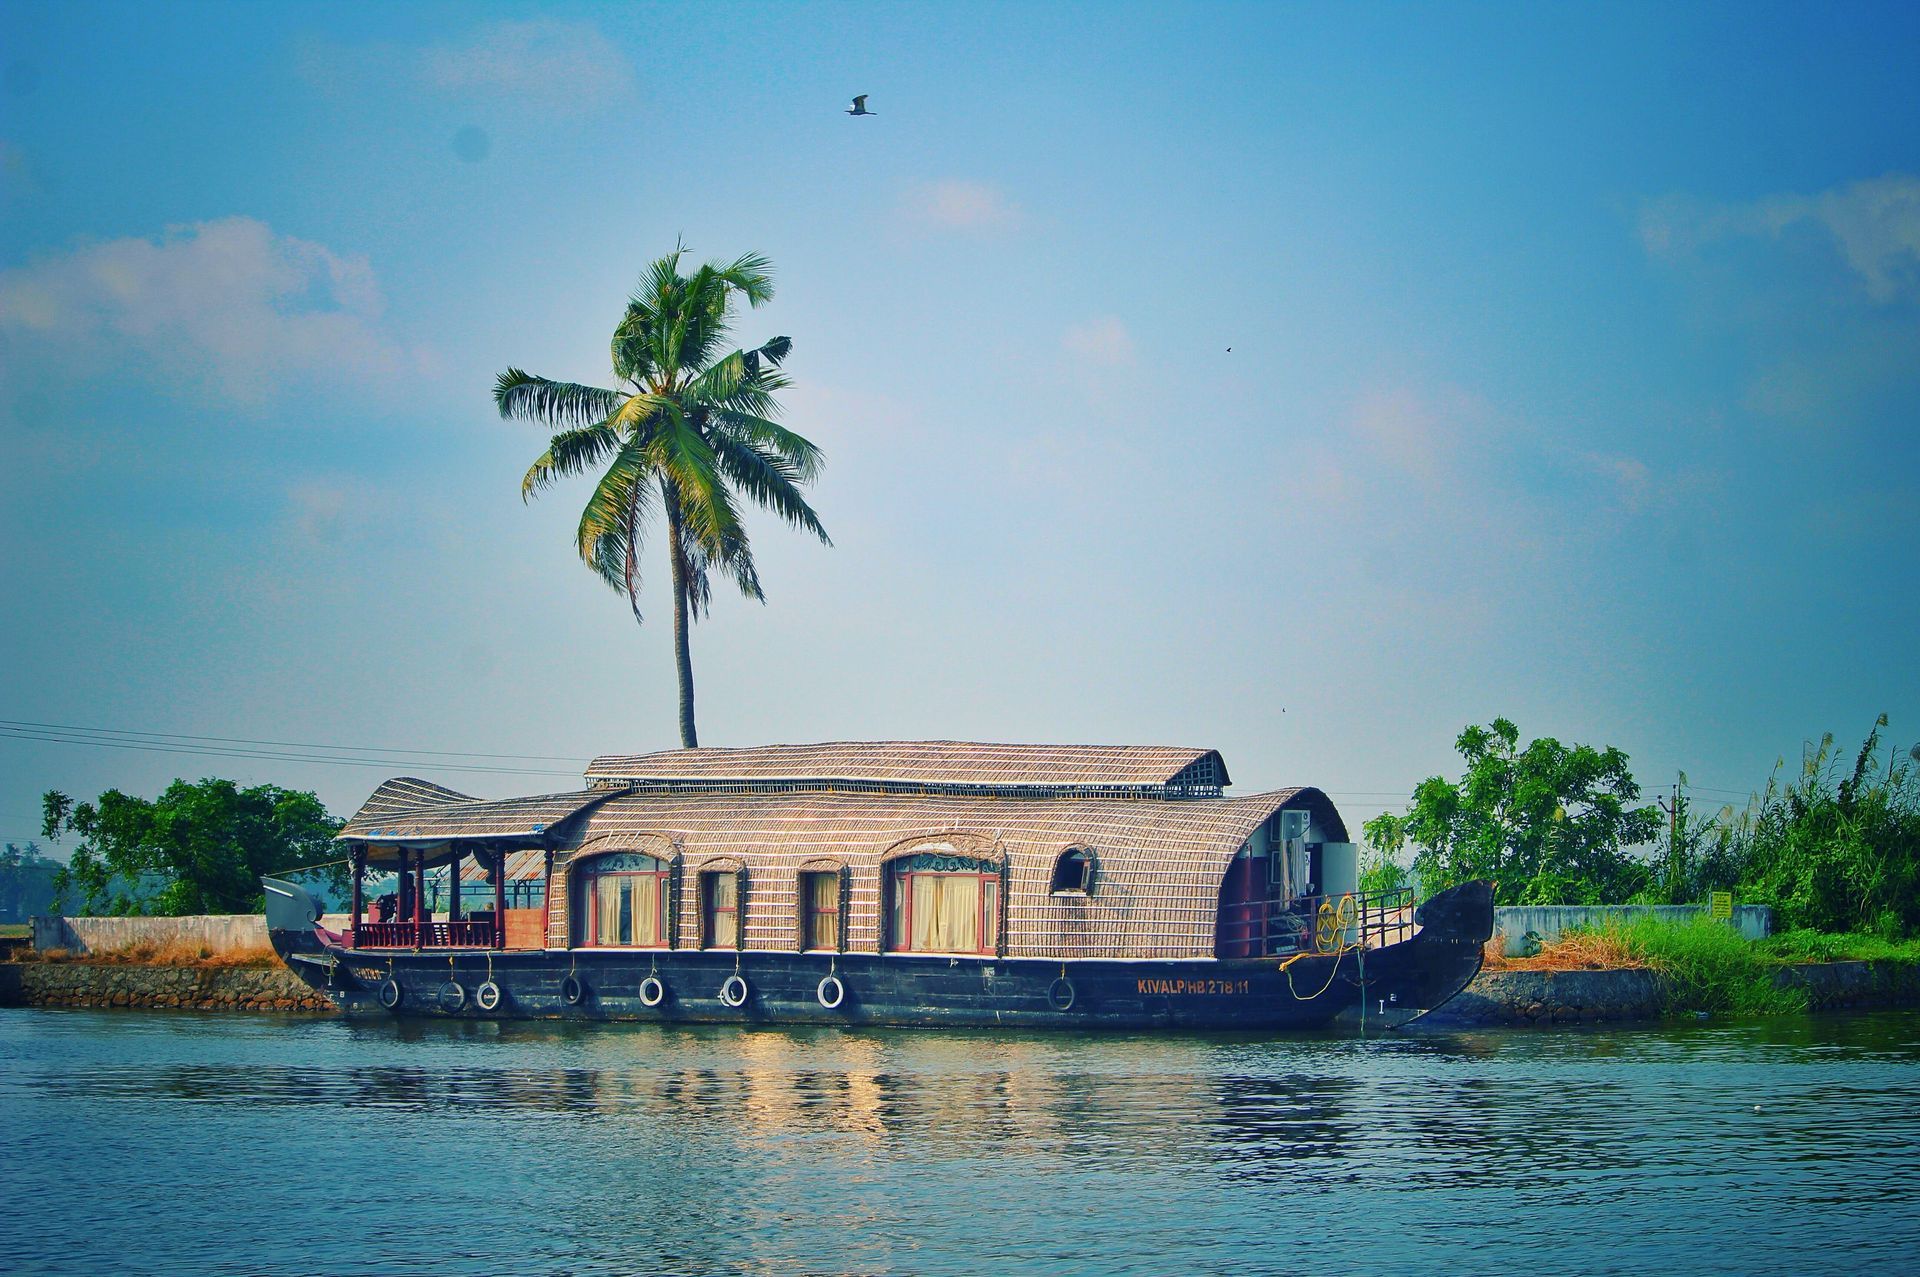 houseboat on the river by a coconut tree